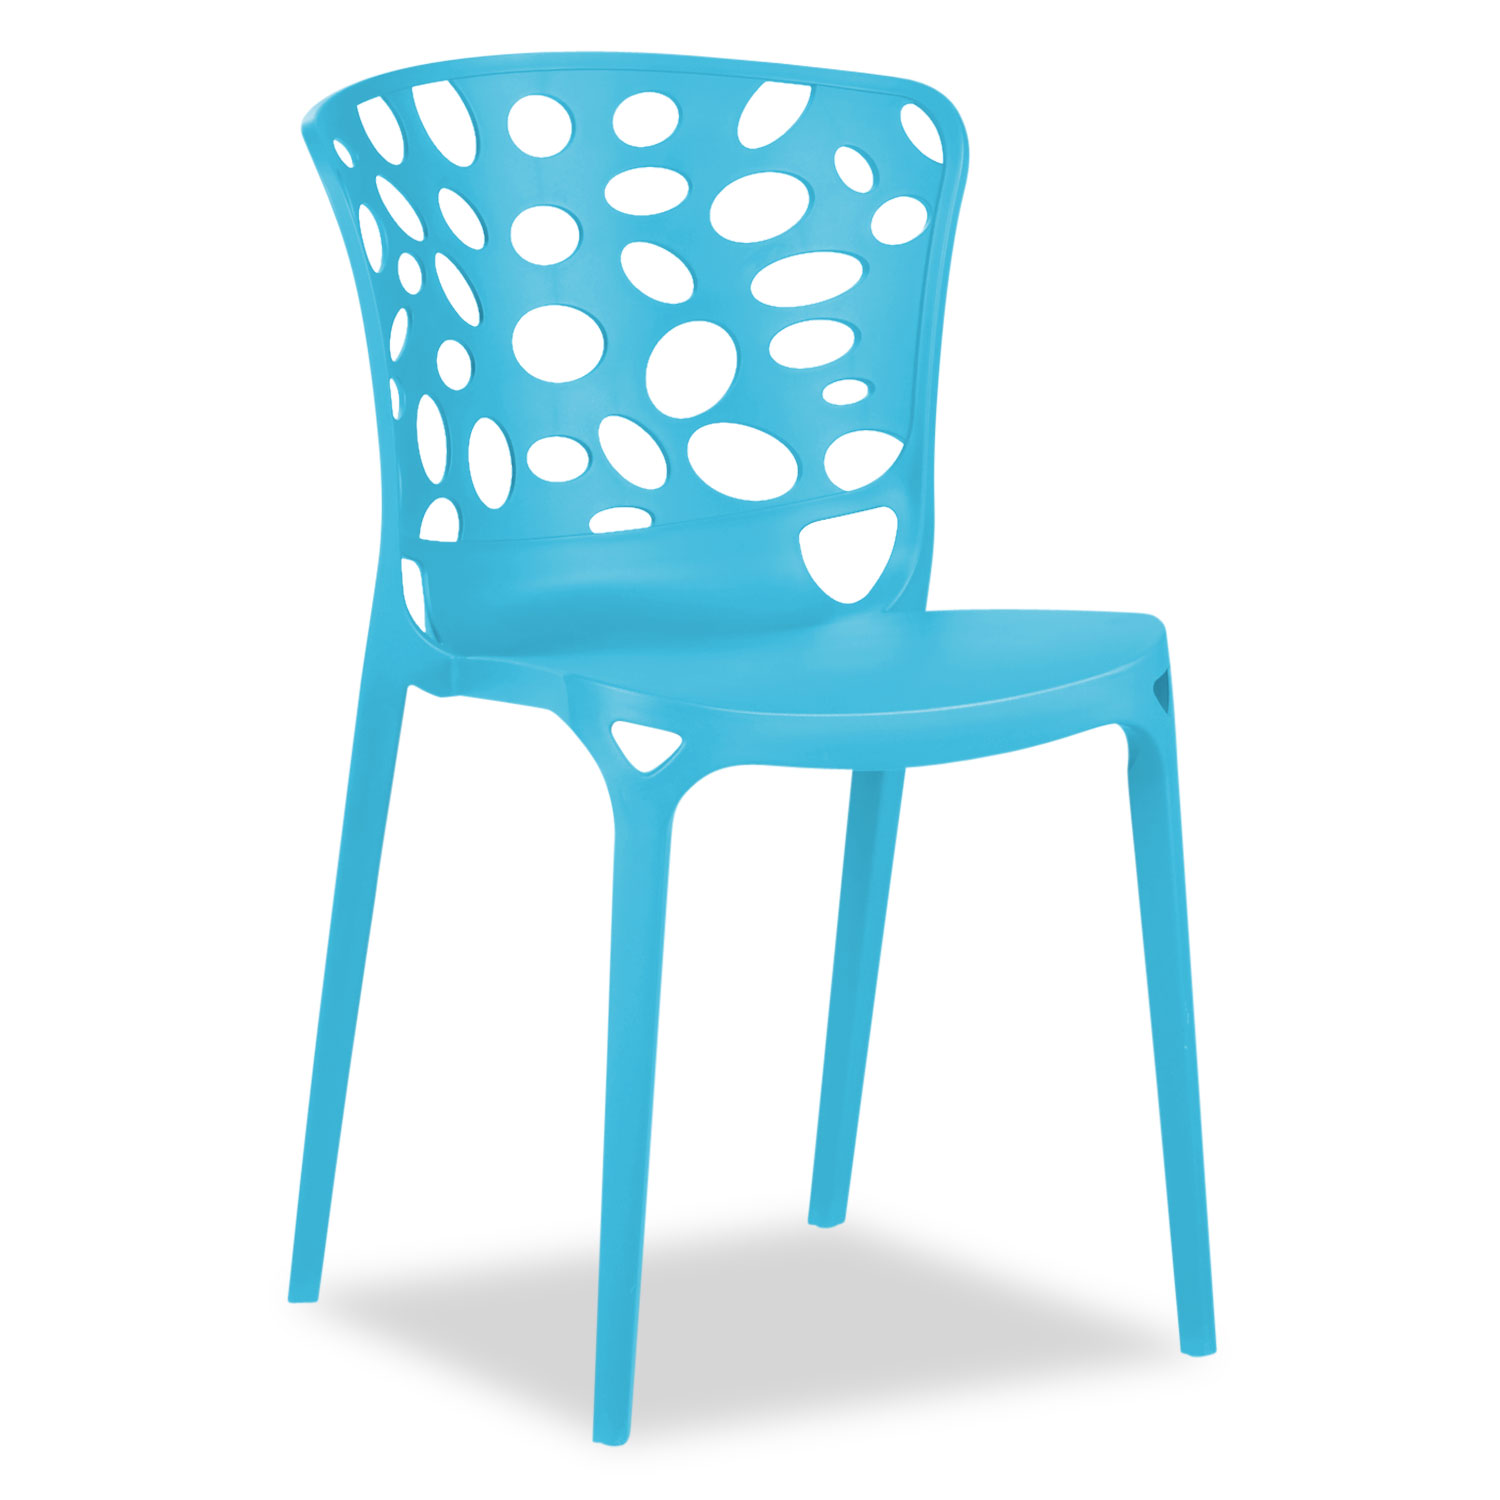 Garden chair Set of 2 Modern Blue Camping chairs Outdoor chairs Plastic Stacking chairs Kitchen chairs